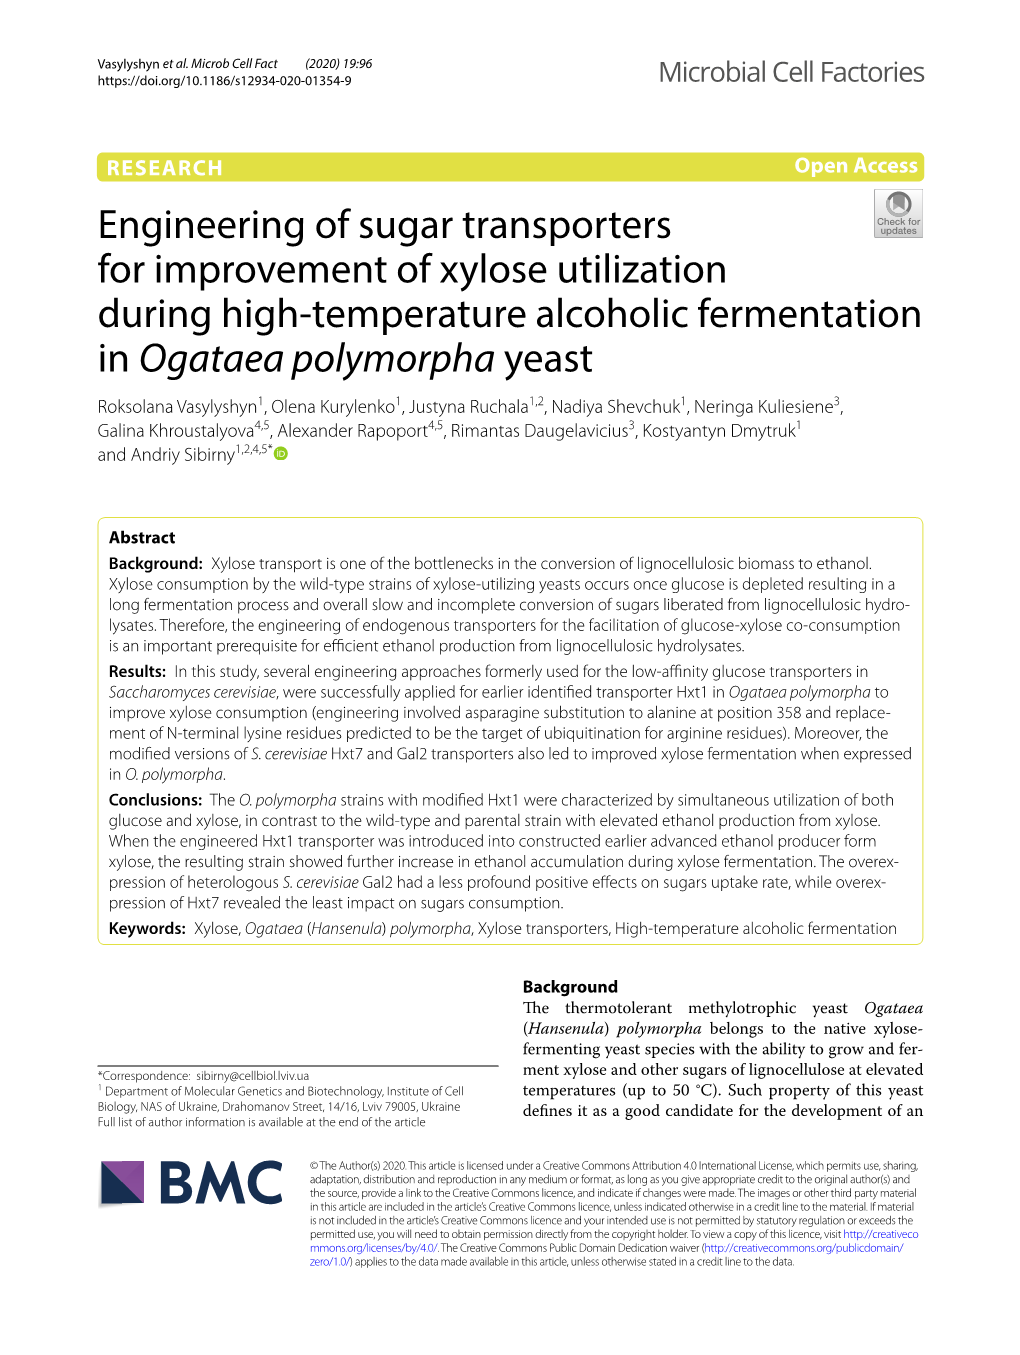 Engineering of Sugar Transporters for Improvement of Xylose Utilization